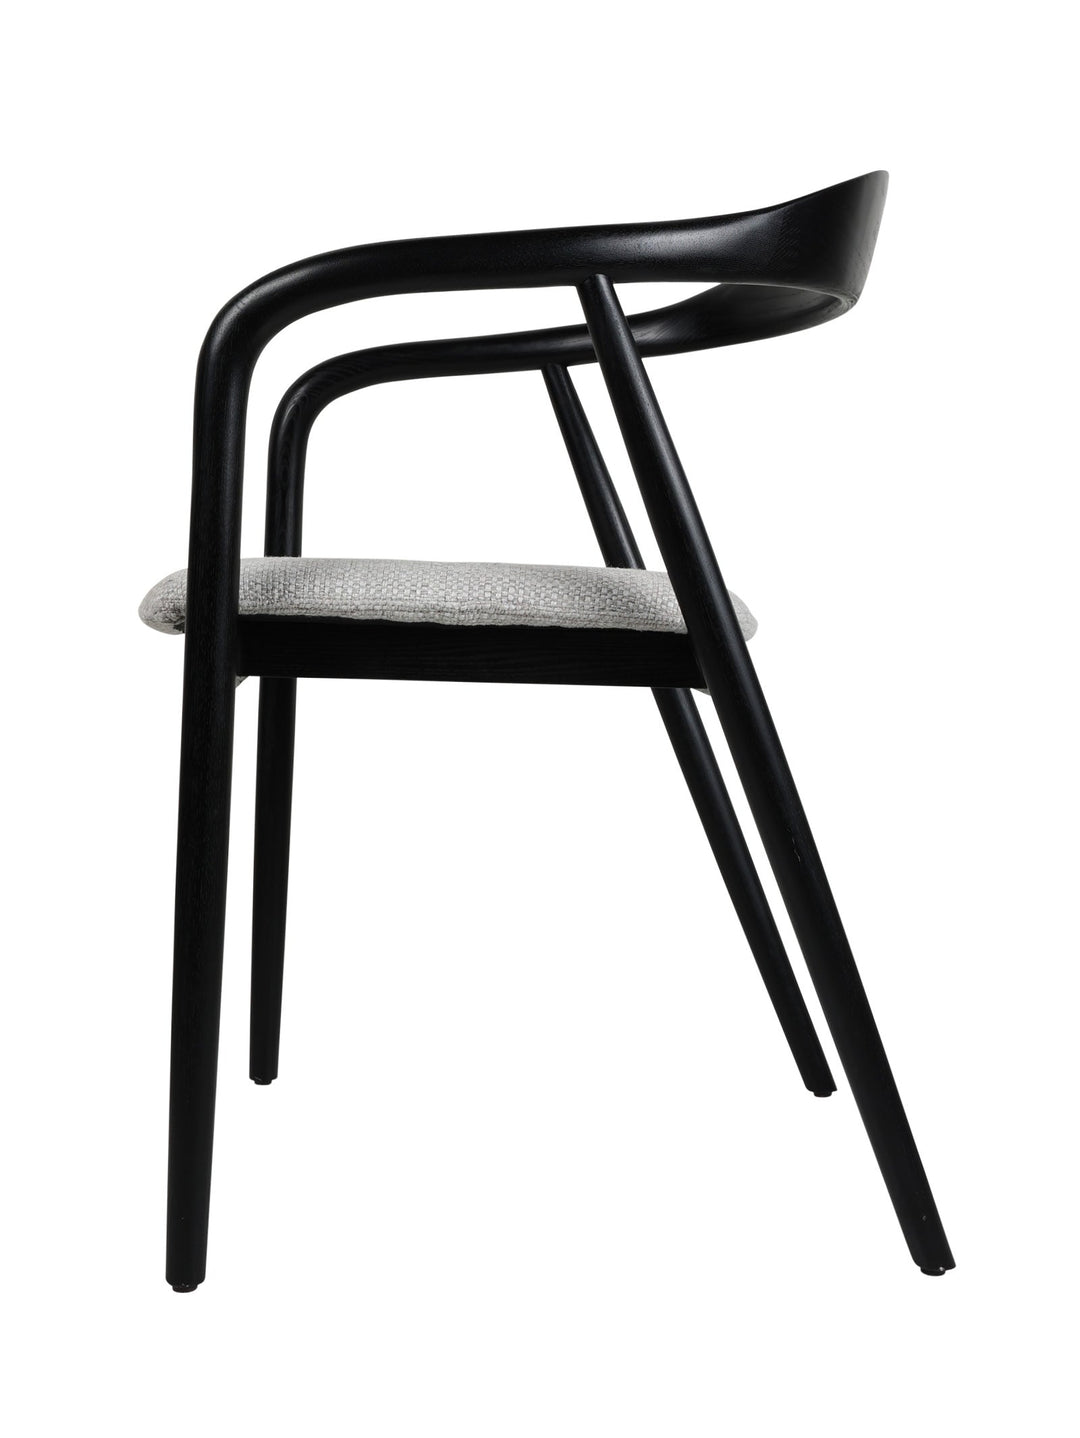 Grace Dining Chair - Kitchen & Dining Room Chairs- Hertex Haus Online - Furniture